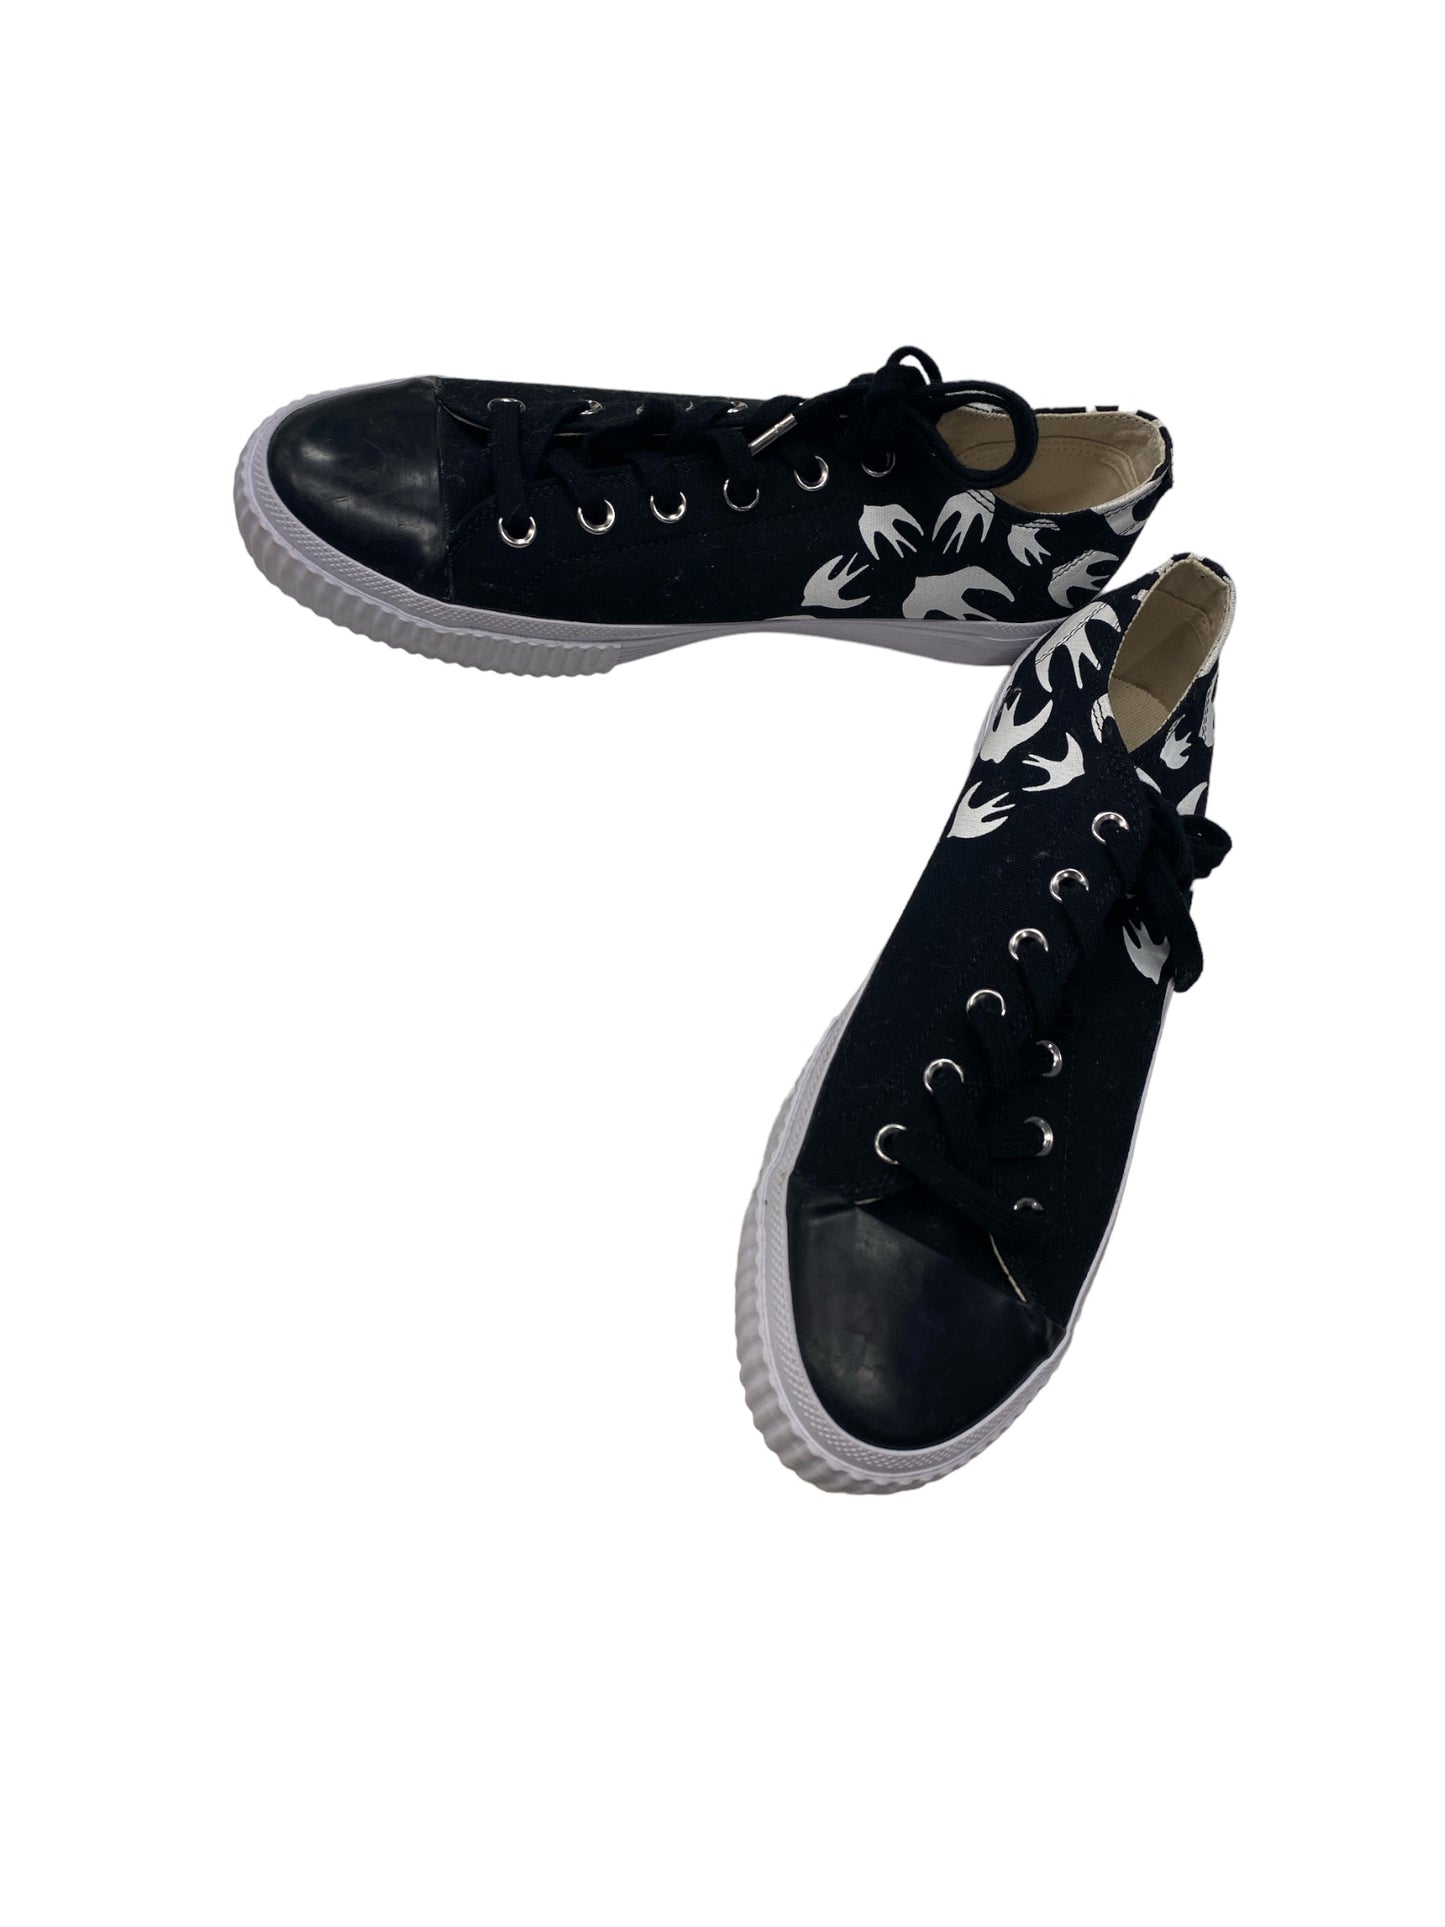 Shoes Athletic By Alexander Mcqueen  Size: 11